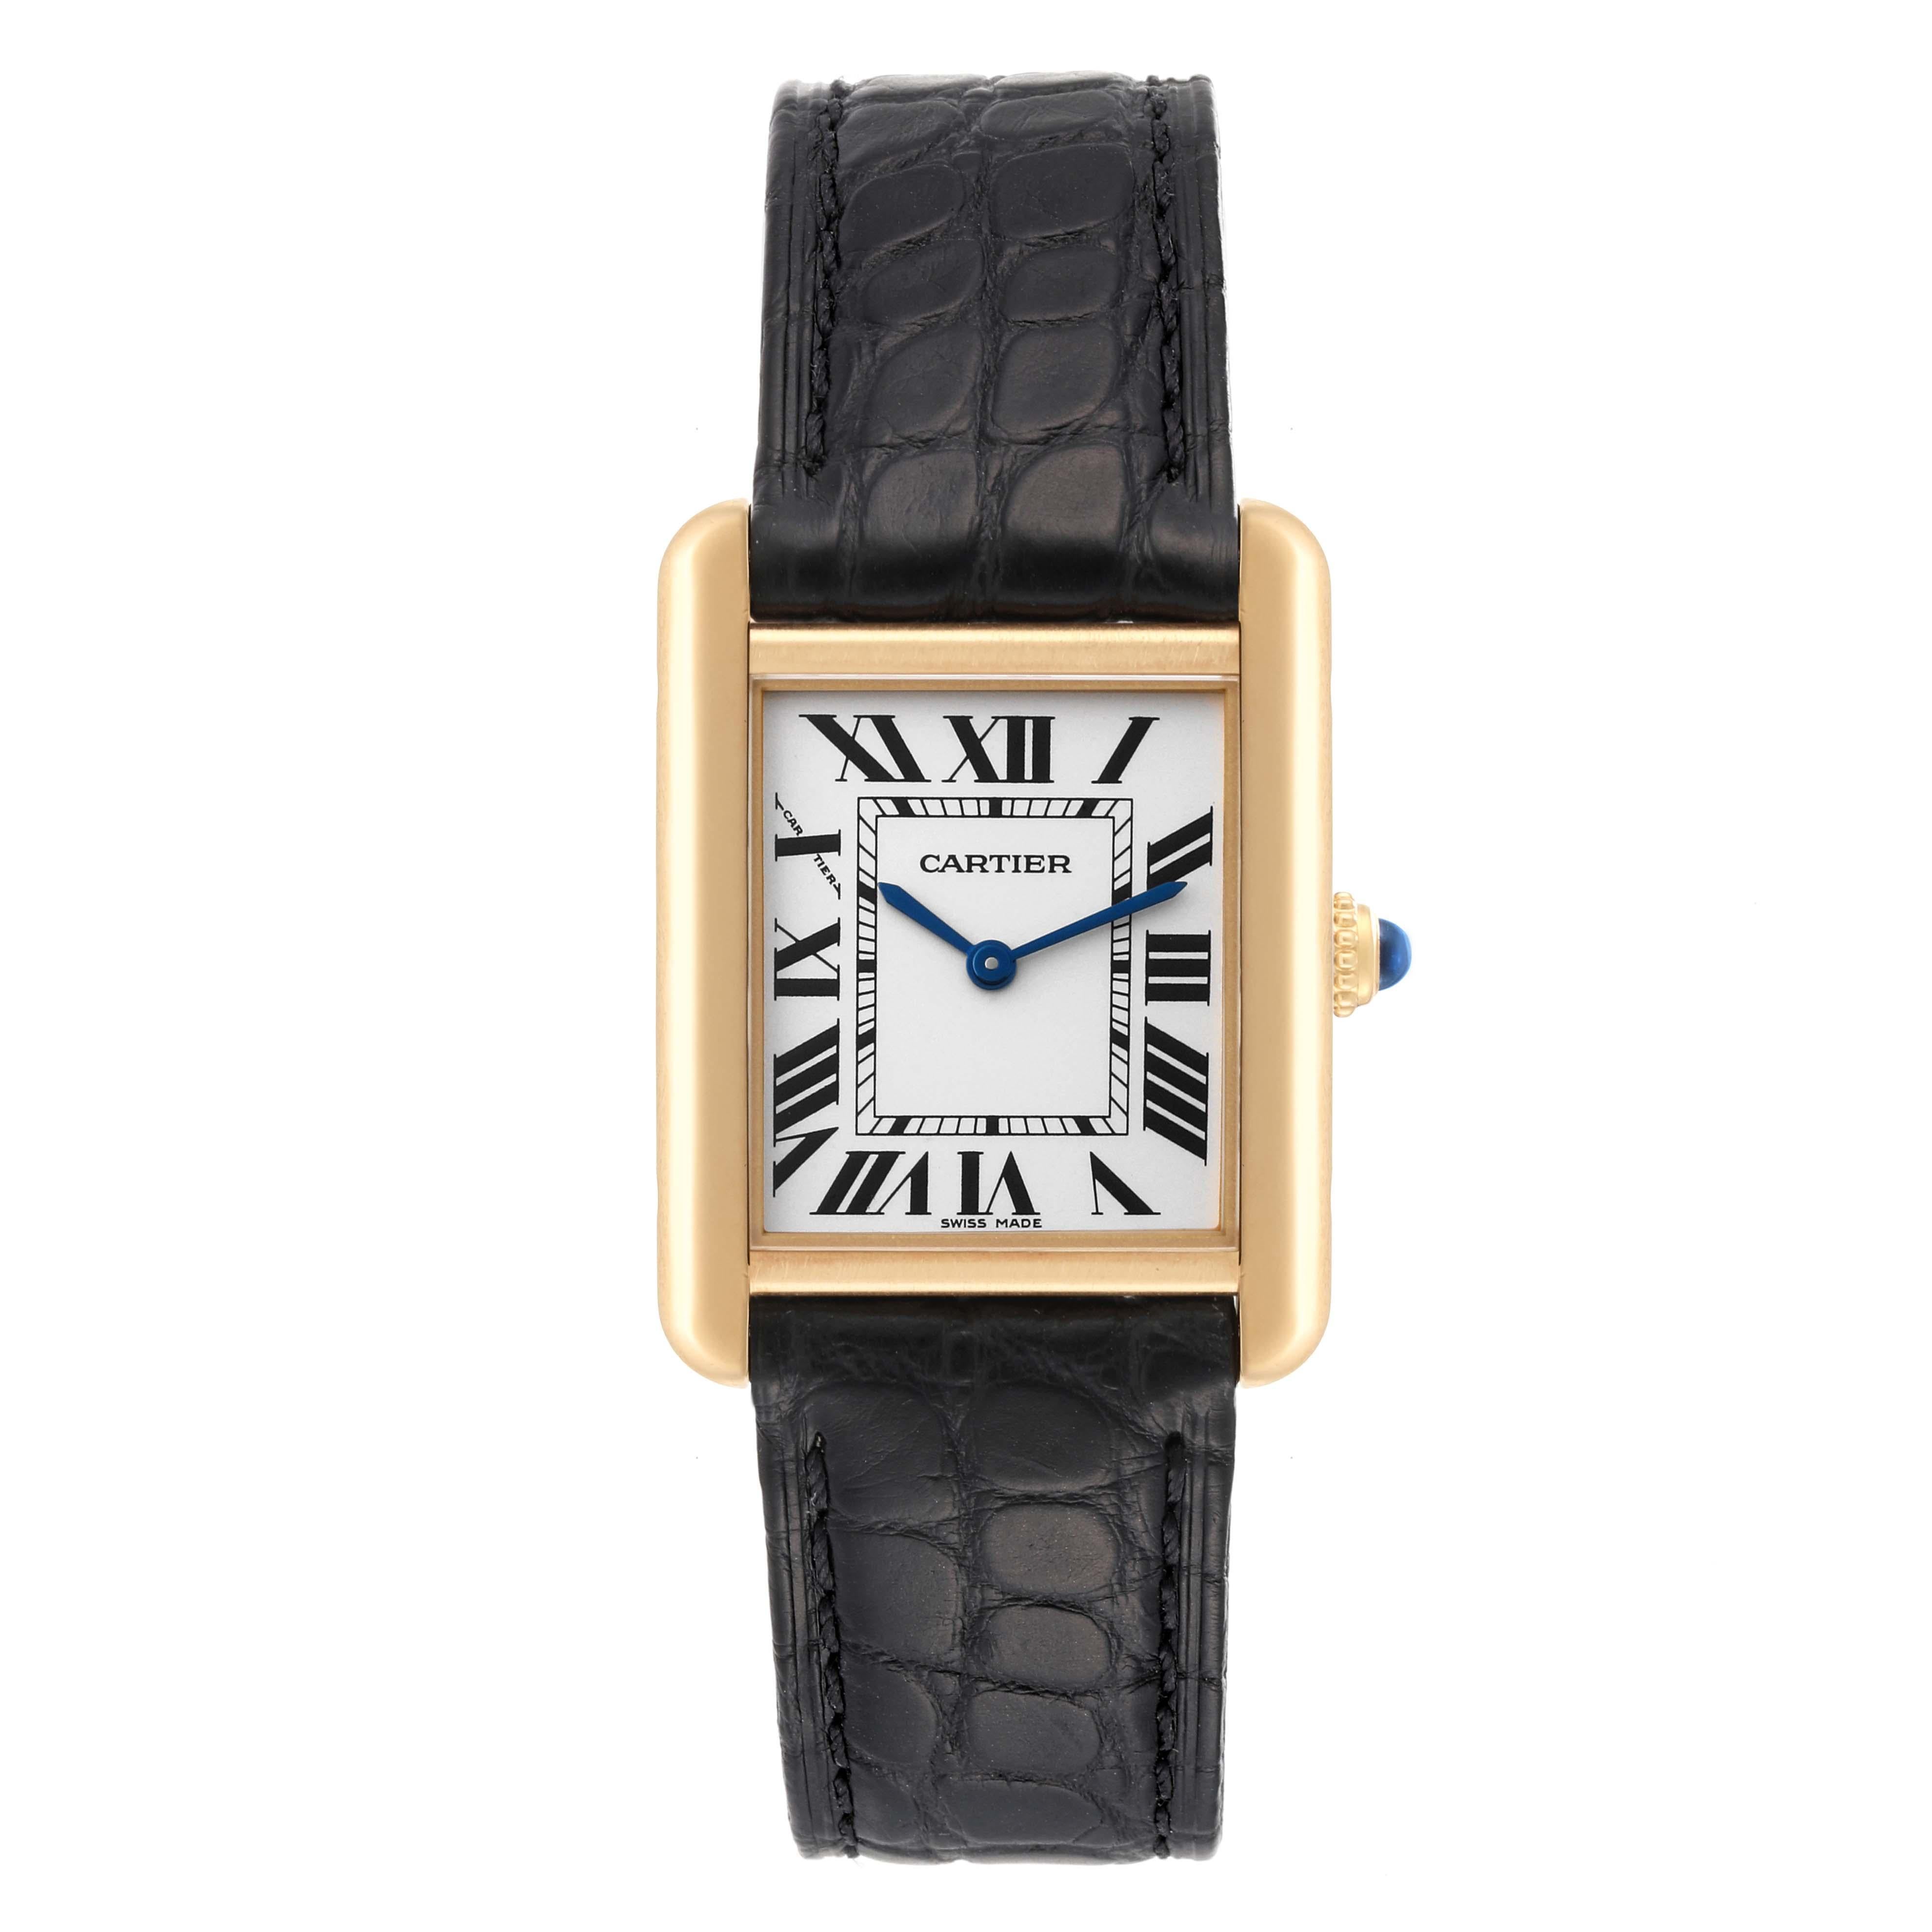 Cartier Tank Solo Yellow Gold Steel Silver Dial Ladies Watch W5200002 Card. Quartz movement. 18k yellow gold and steel case back 30.0 x 24.4 mm. Circular grained crown set with the blue spinel cabochon. . Scratch resistant sapphire crystal. Opaline